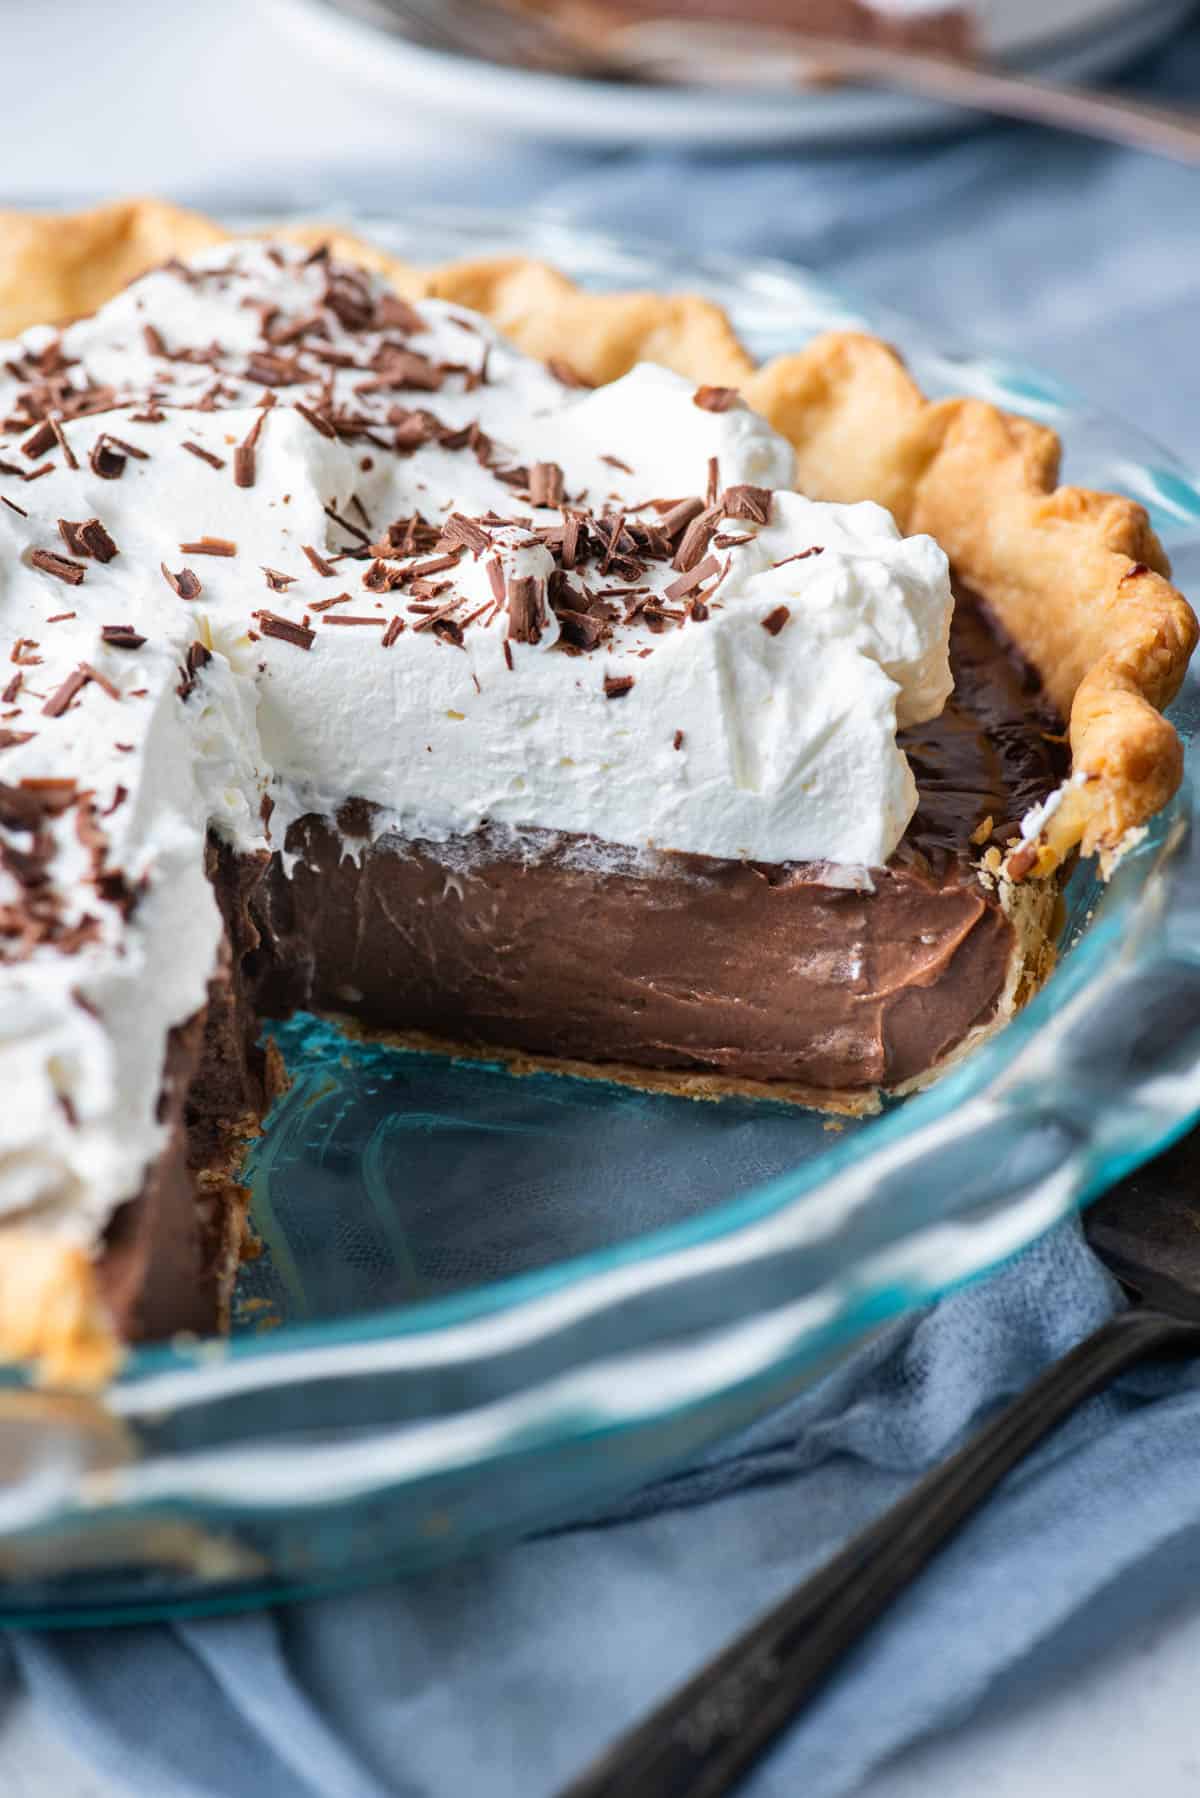 a chocolate pie in a glass pie dish missing one slice of pie, sitting on top of a blue towel with a serving utensil beside the pie dish